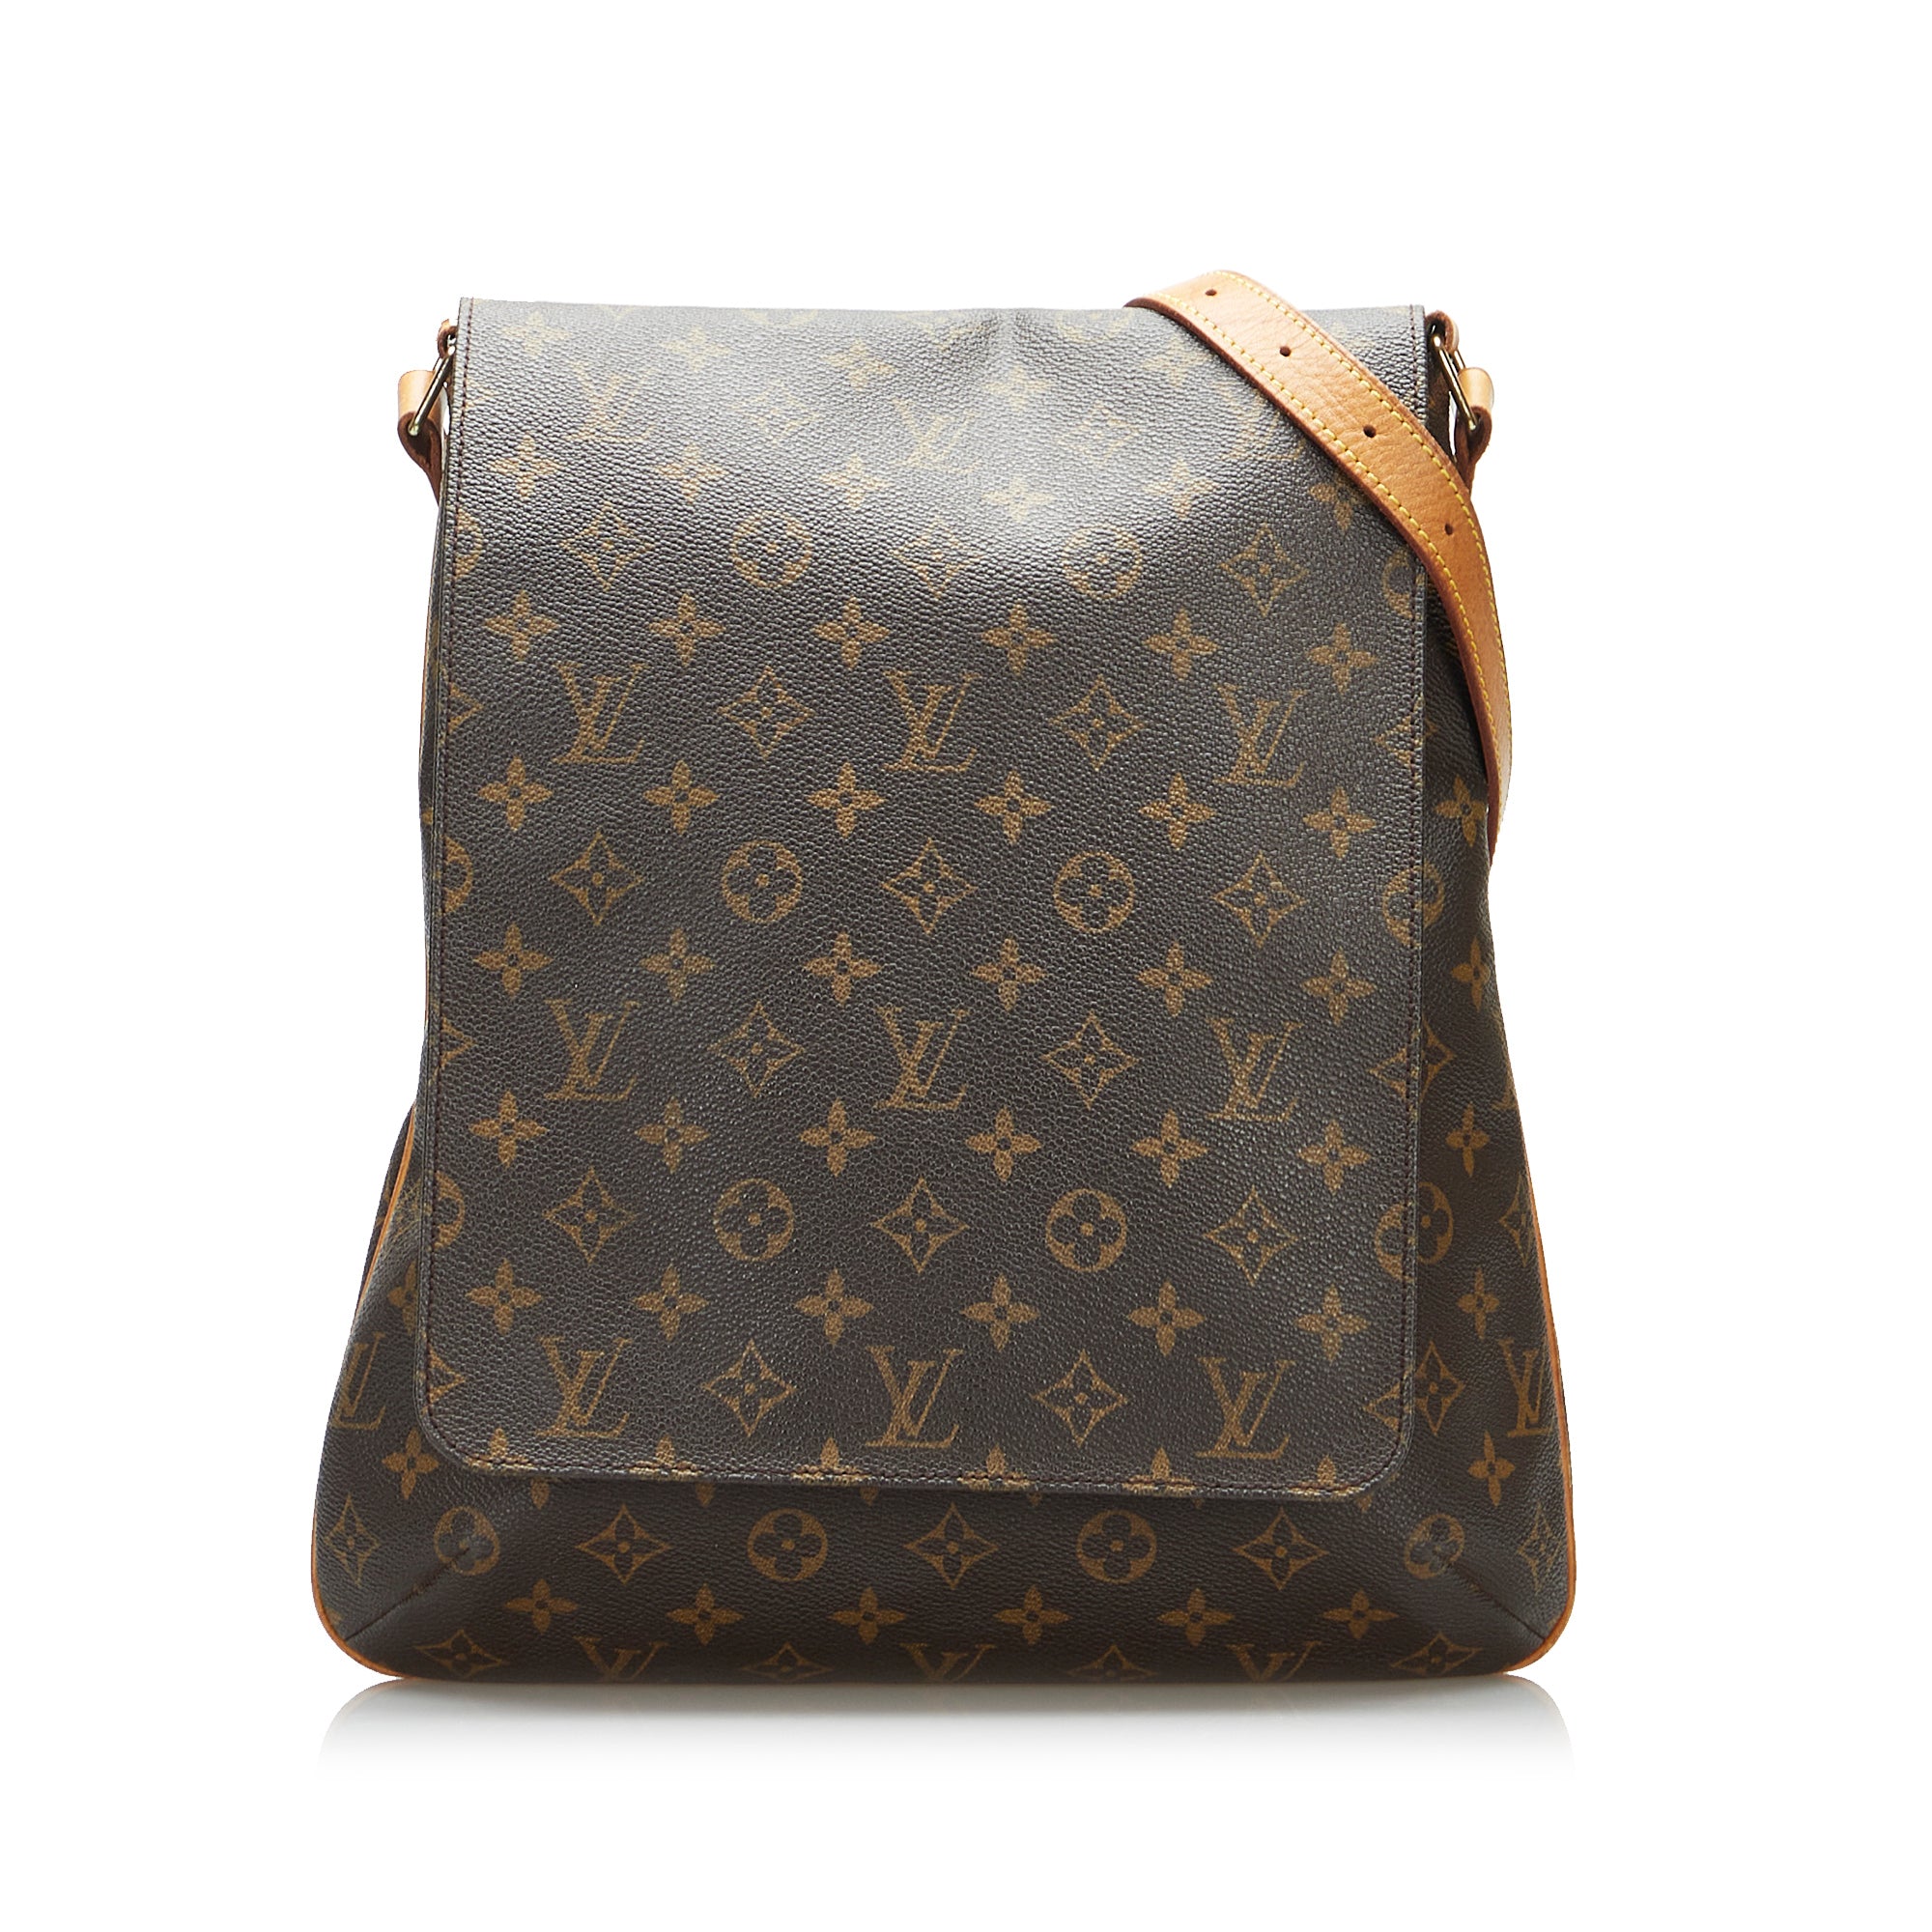 Get one of the hottest styles of the season! The Louis Vuitton Musette  Salsa Gm Monogram Canvas Shoulder Bag is one of the favorite in our  boutique., By Adore Designer Resale